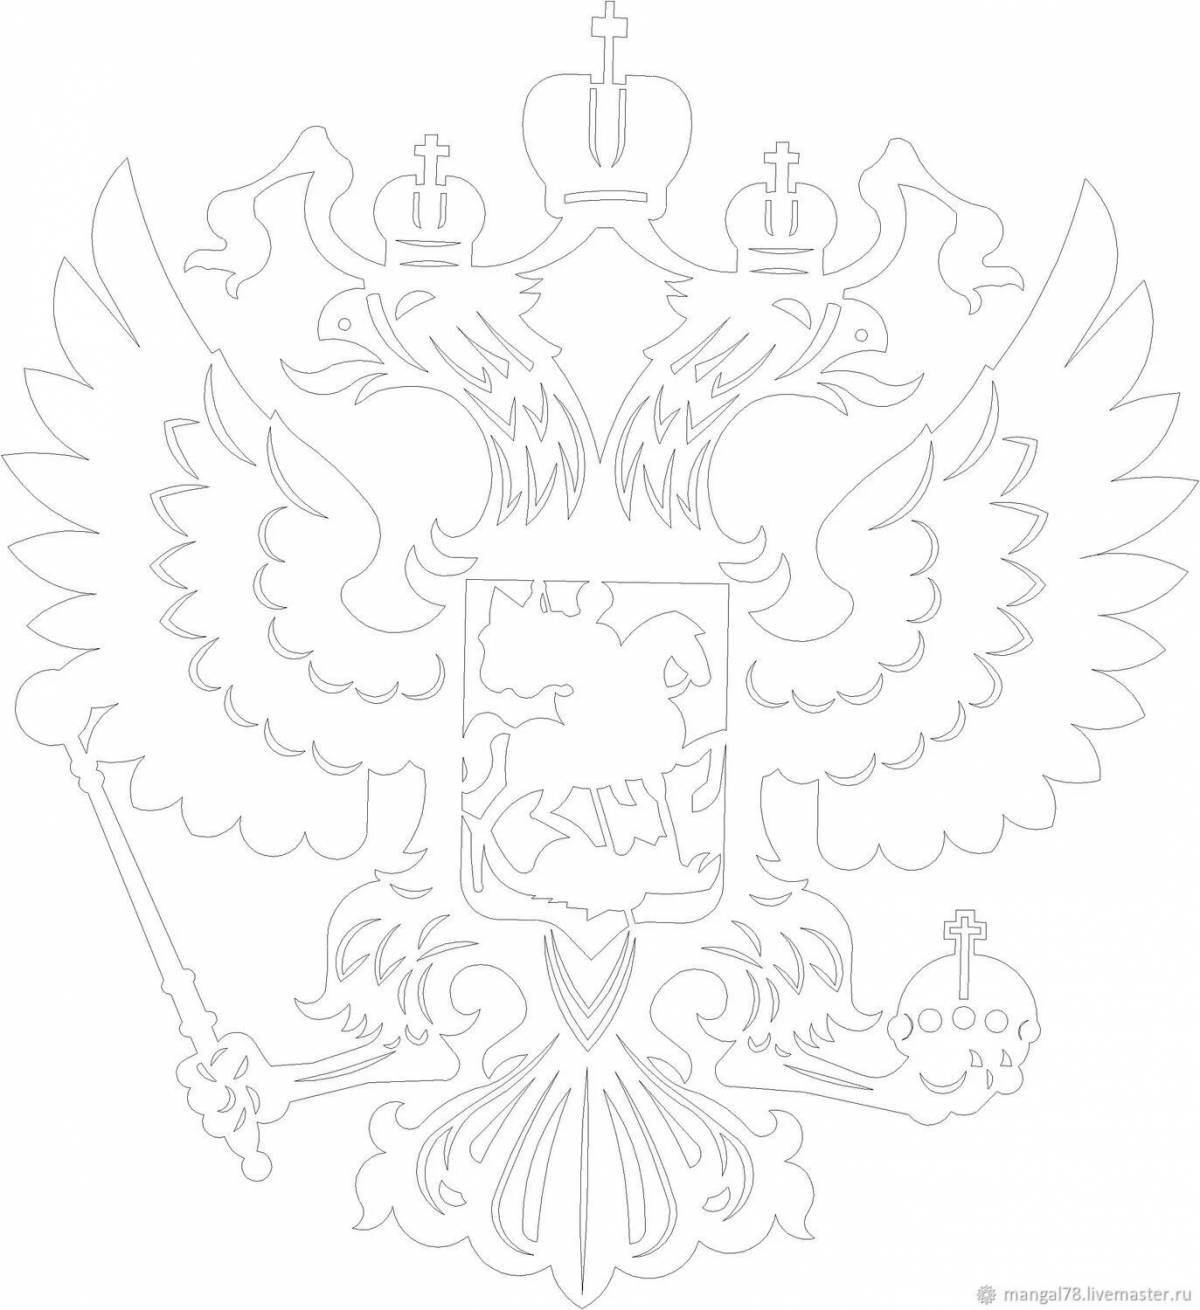 Bright coloring double-headed eagle